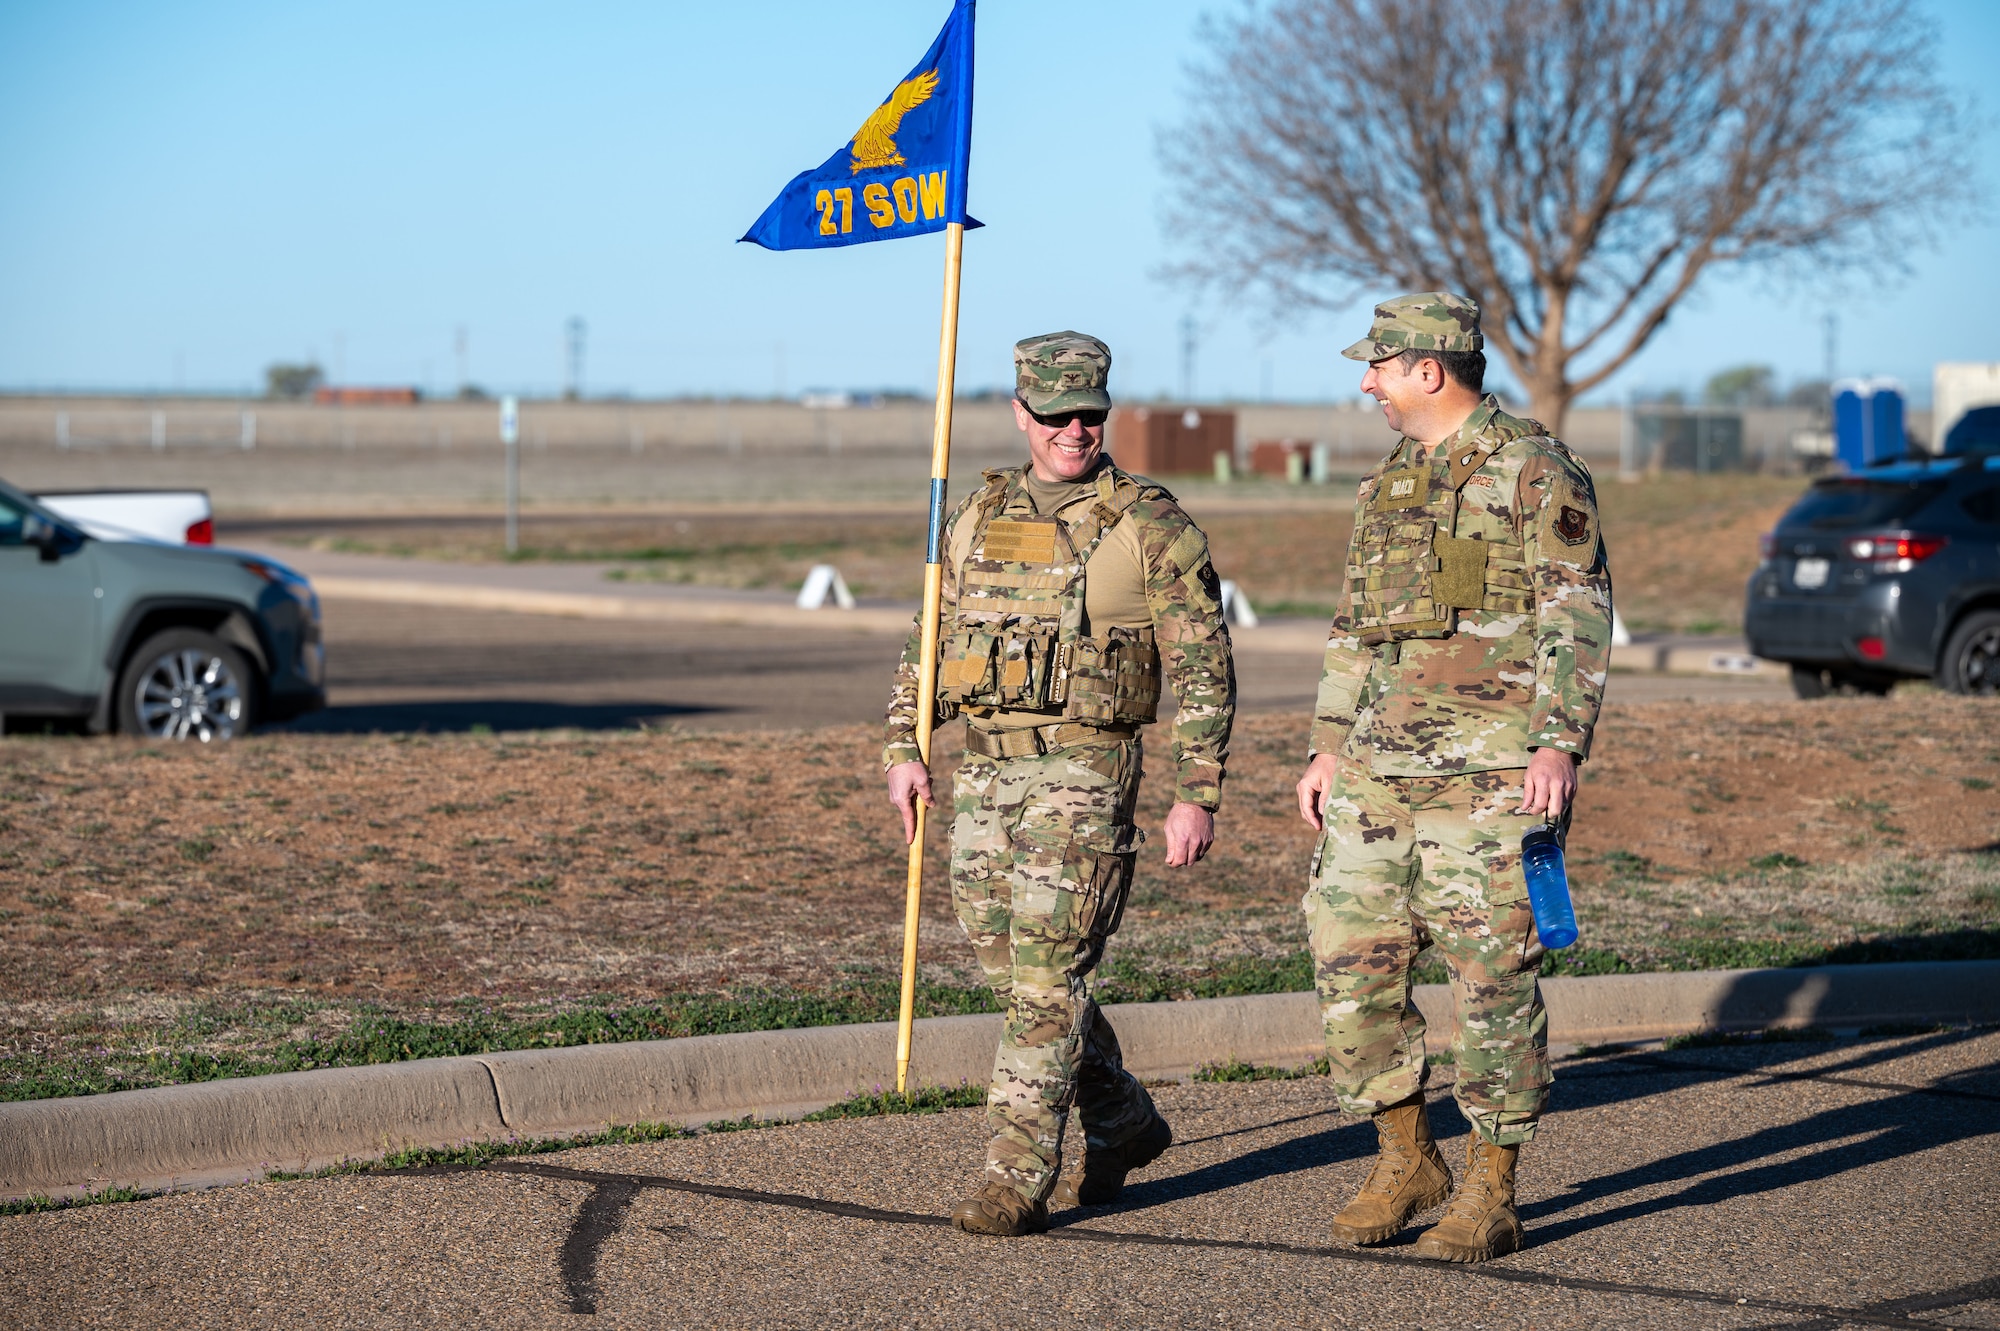 U.S. Air Force Col. Jeremy Bergin, 27th Special Operations Wing commander, left, and Col. Brent Greer, 27 SOW deputy commander, right, carry the 27 SOW guidon during the 3rd Annual Steadfast Ruck March at Cannon Air Force Base, N.M., March 22, 2024. The memorial event honored the men of the 27th Bombardment Group and others who were part of the original Bataan Death March, a forced movement of 75,000 U.S. and Filipino soldiers from the Bataan Peninsula in the Philippines. (U.S. Air Force photo by 2nd Lt. Charles Moye)